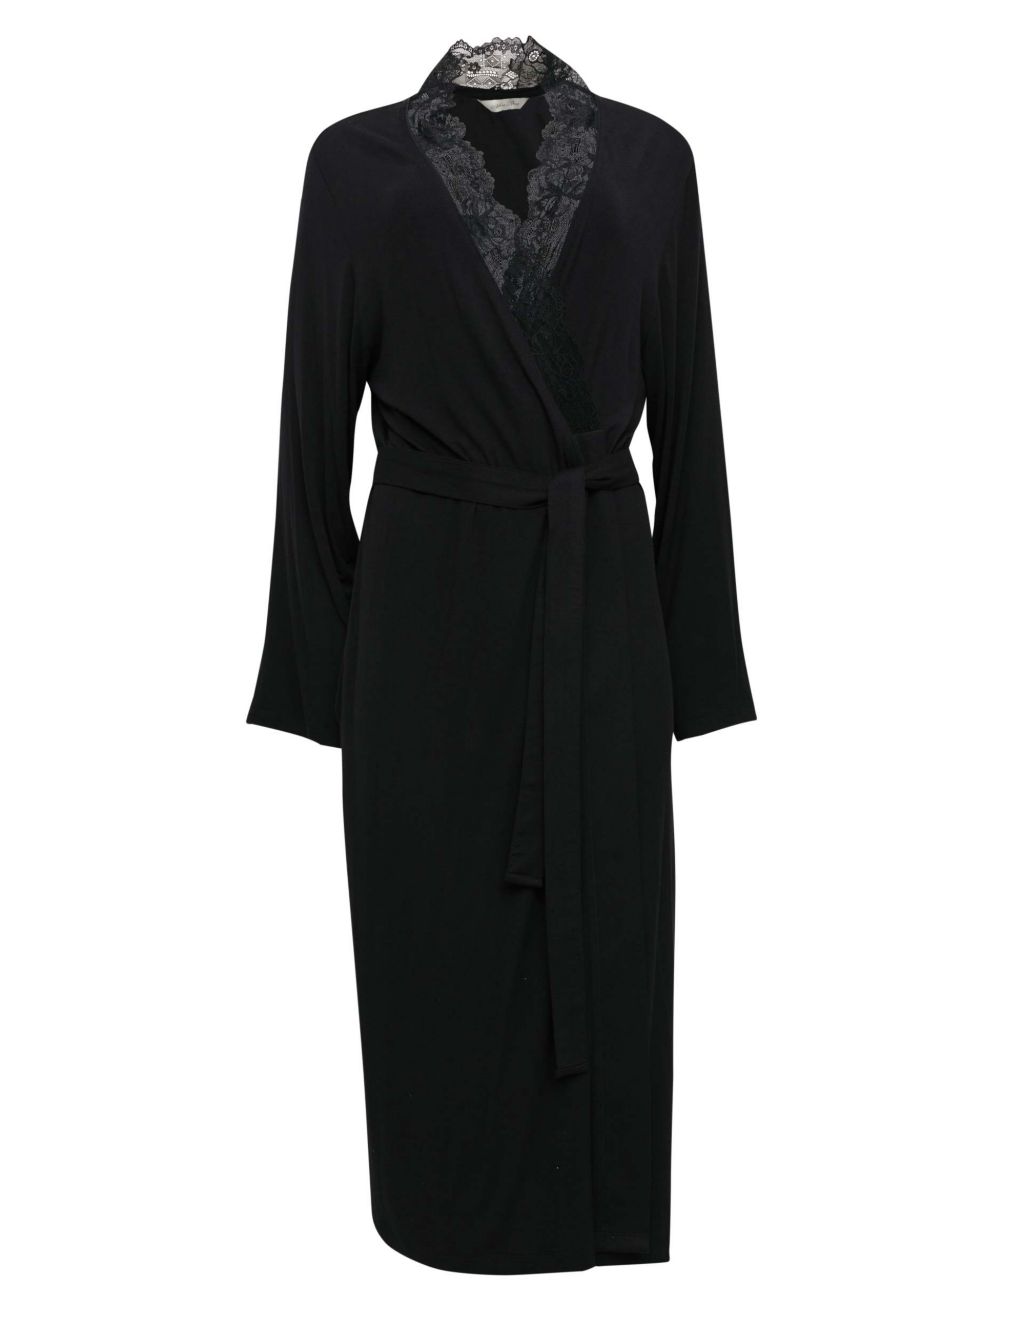 Jersey Lace Trim Long Dressing Gown image 2